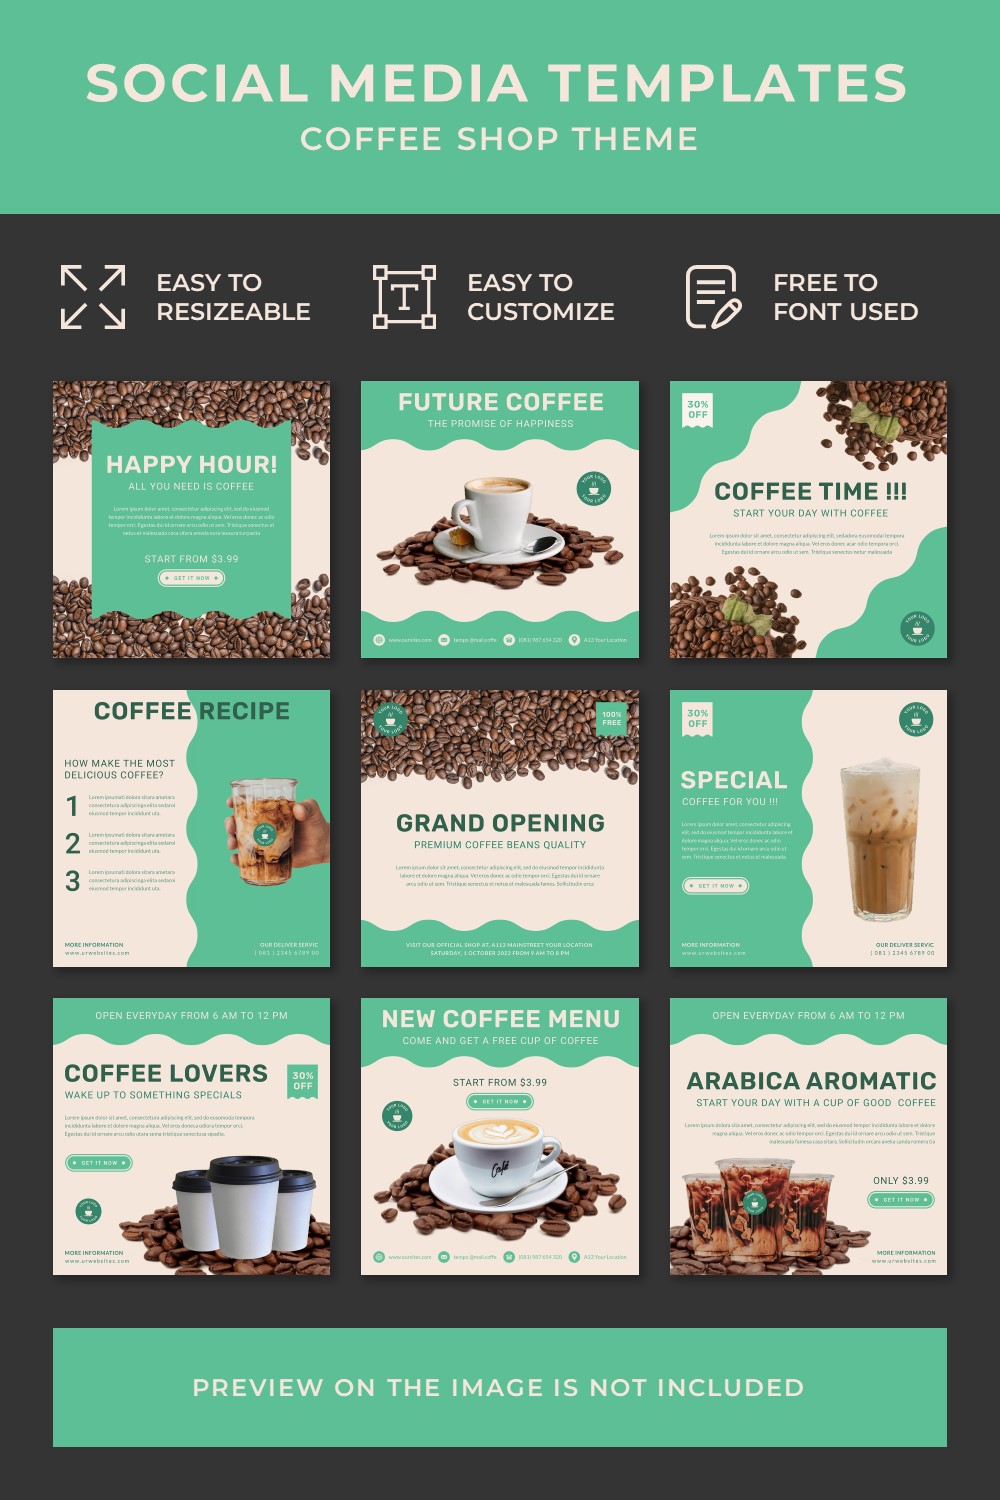 Pinterest collage image with Coffee Shop Social Media Post Templates.